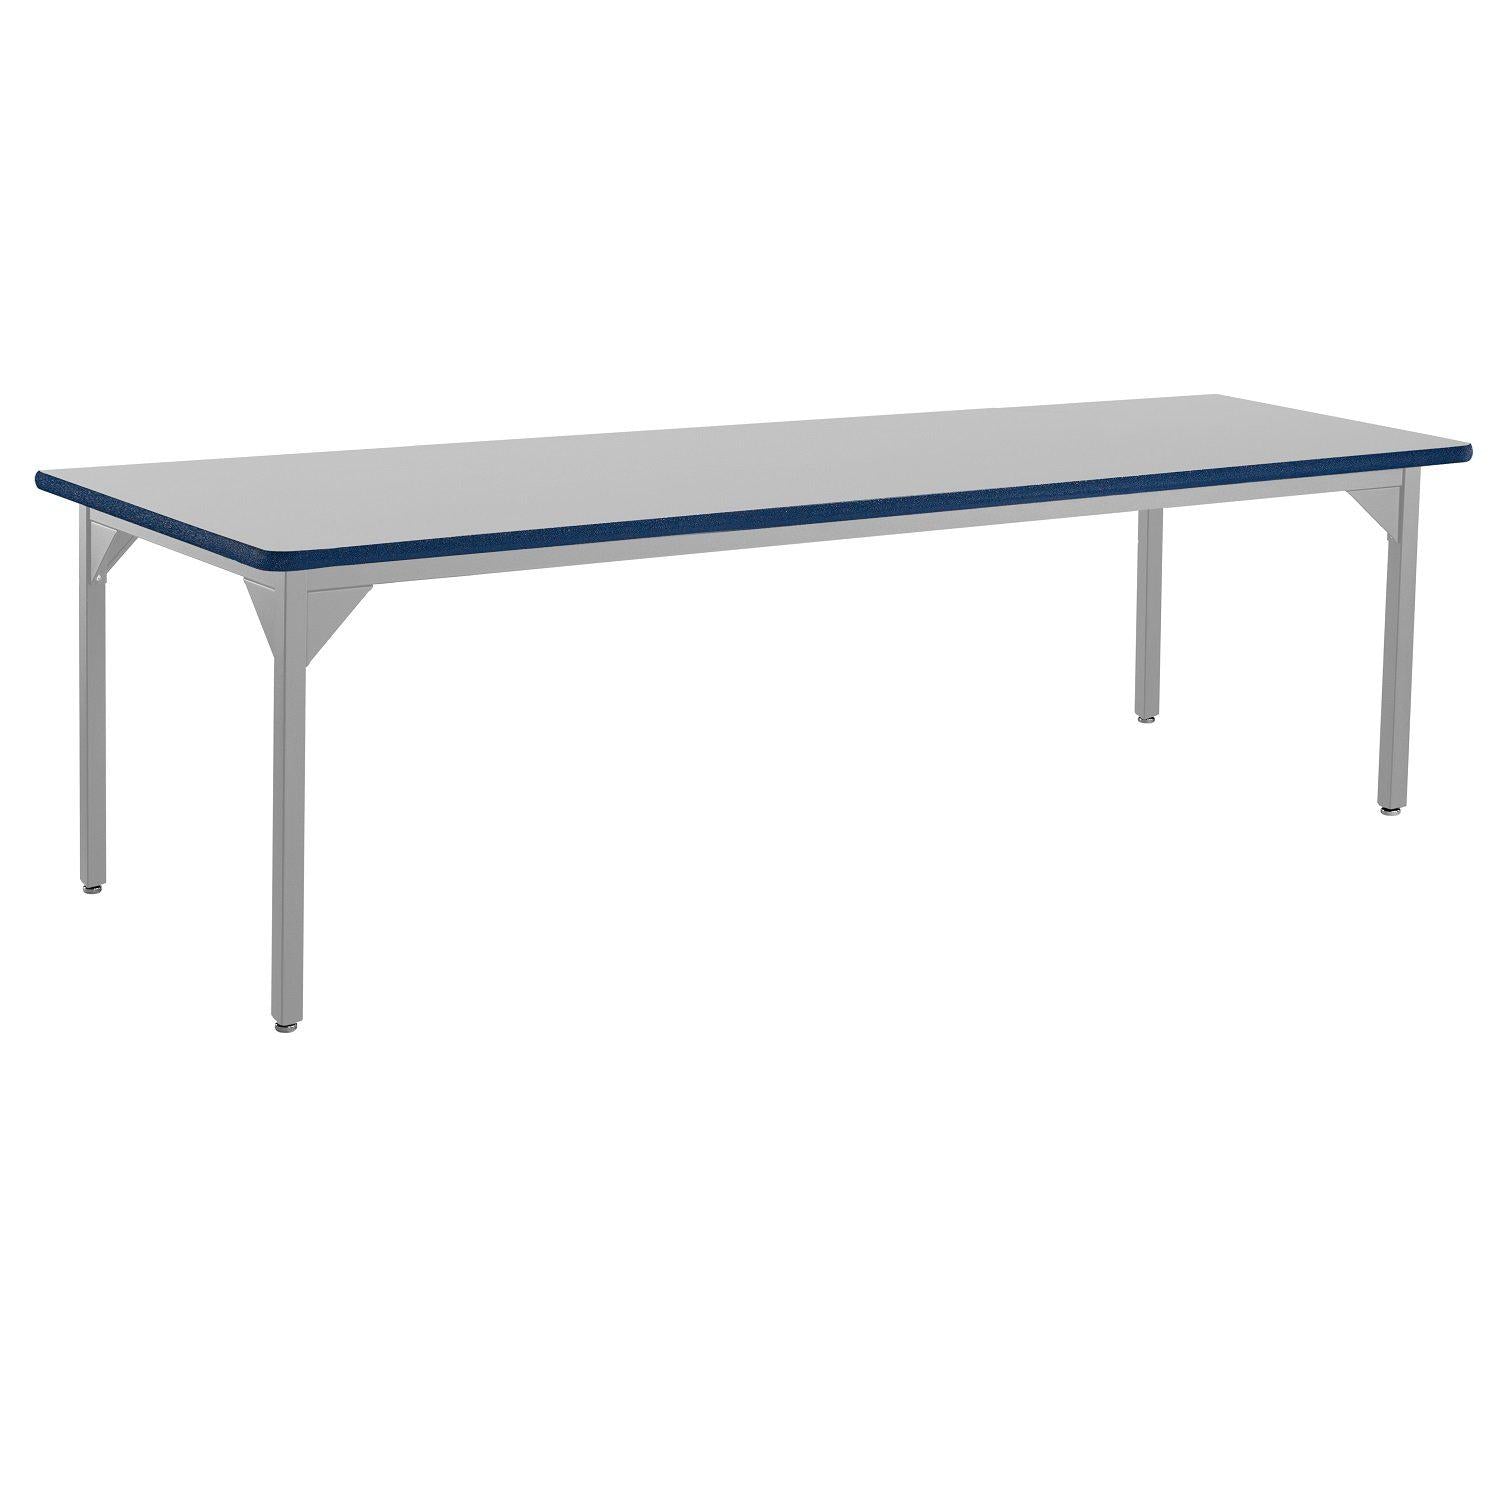 Heavy-Duty Fixed Height Utility Table, Soft Grey Frame, 36" x 84", Supreme High-Pressure Laminate Top with Black ProtectEdge